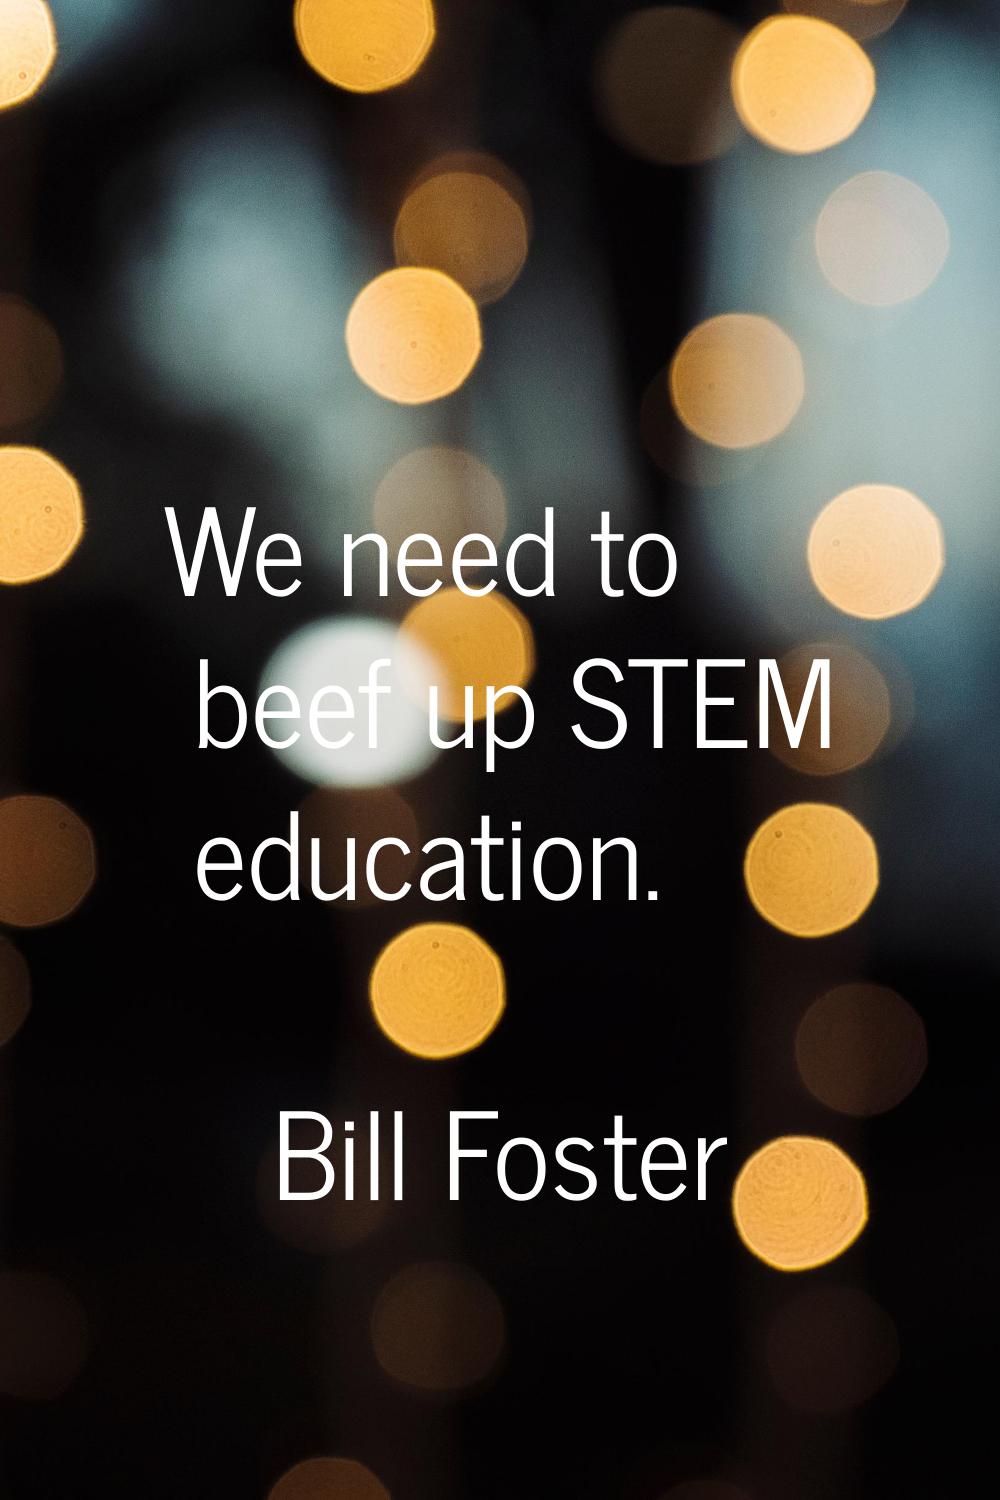 We need to beef up STEM education.